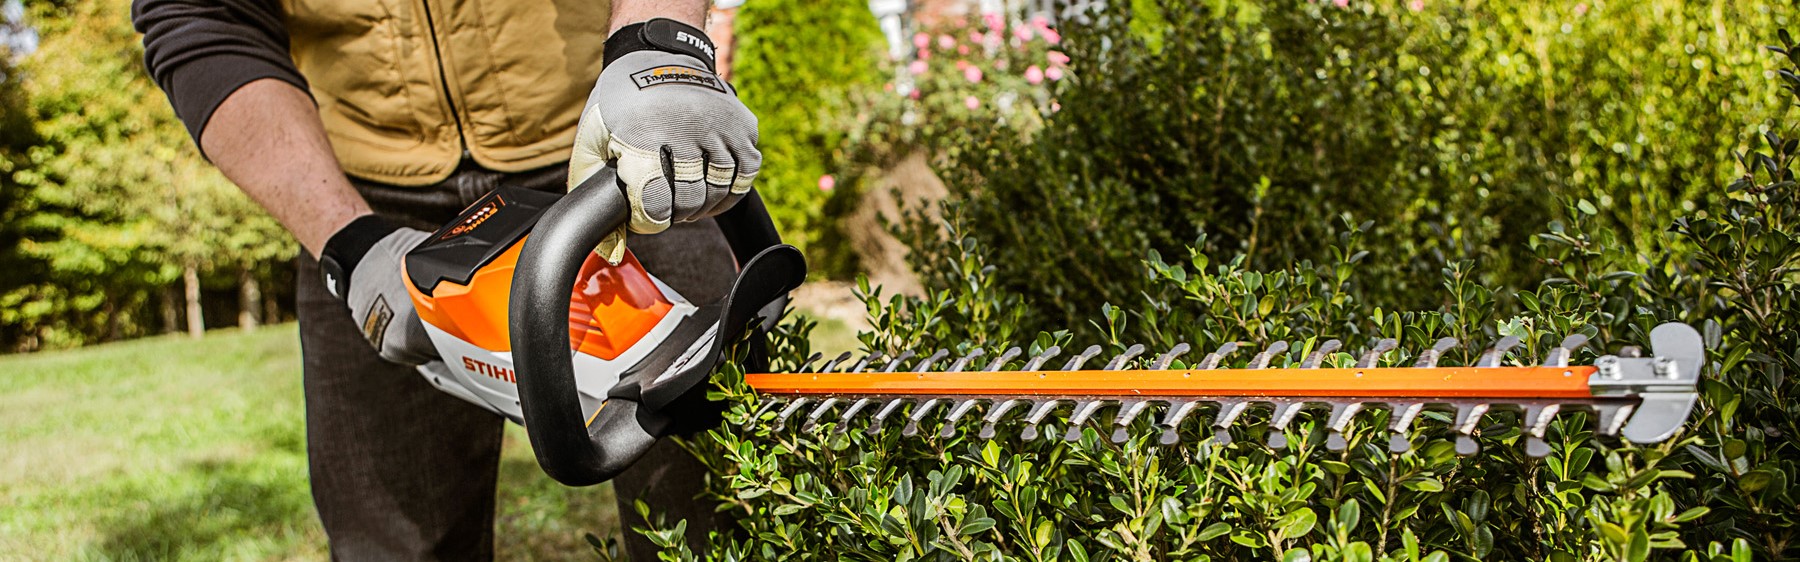 stihl corded hedge trimmer